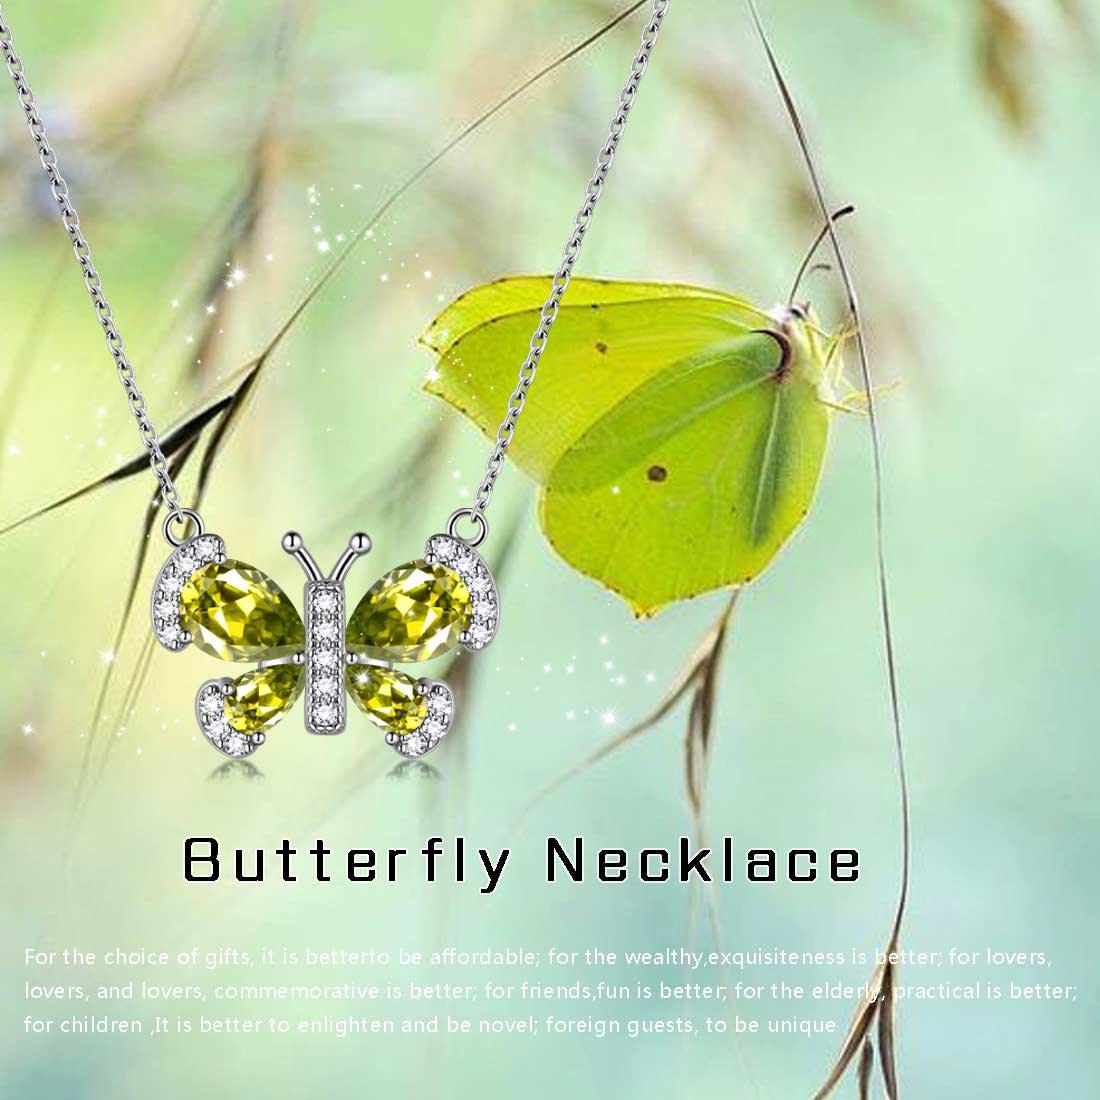 Butterfly Necklace Birthstone August Peridot Pendant - Necklaces - Aurora Tears